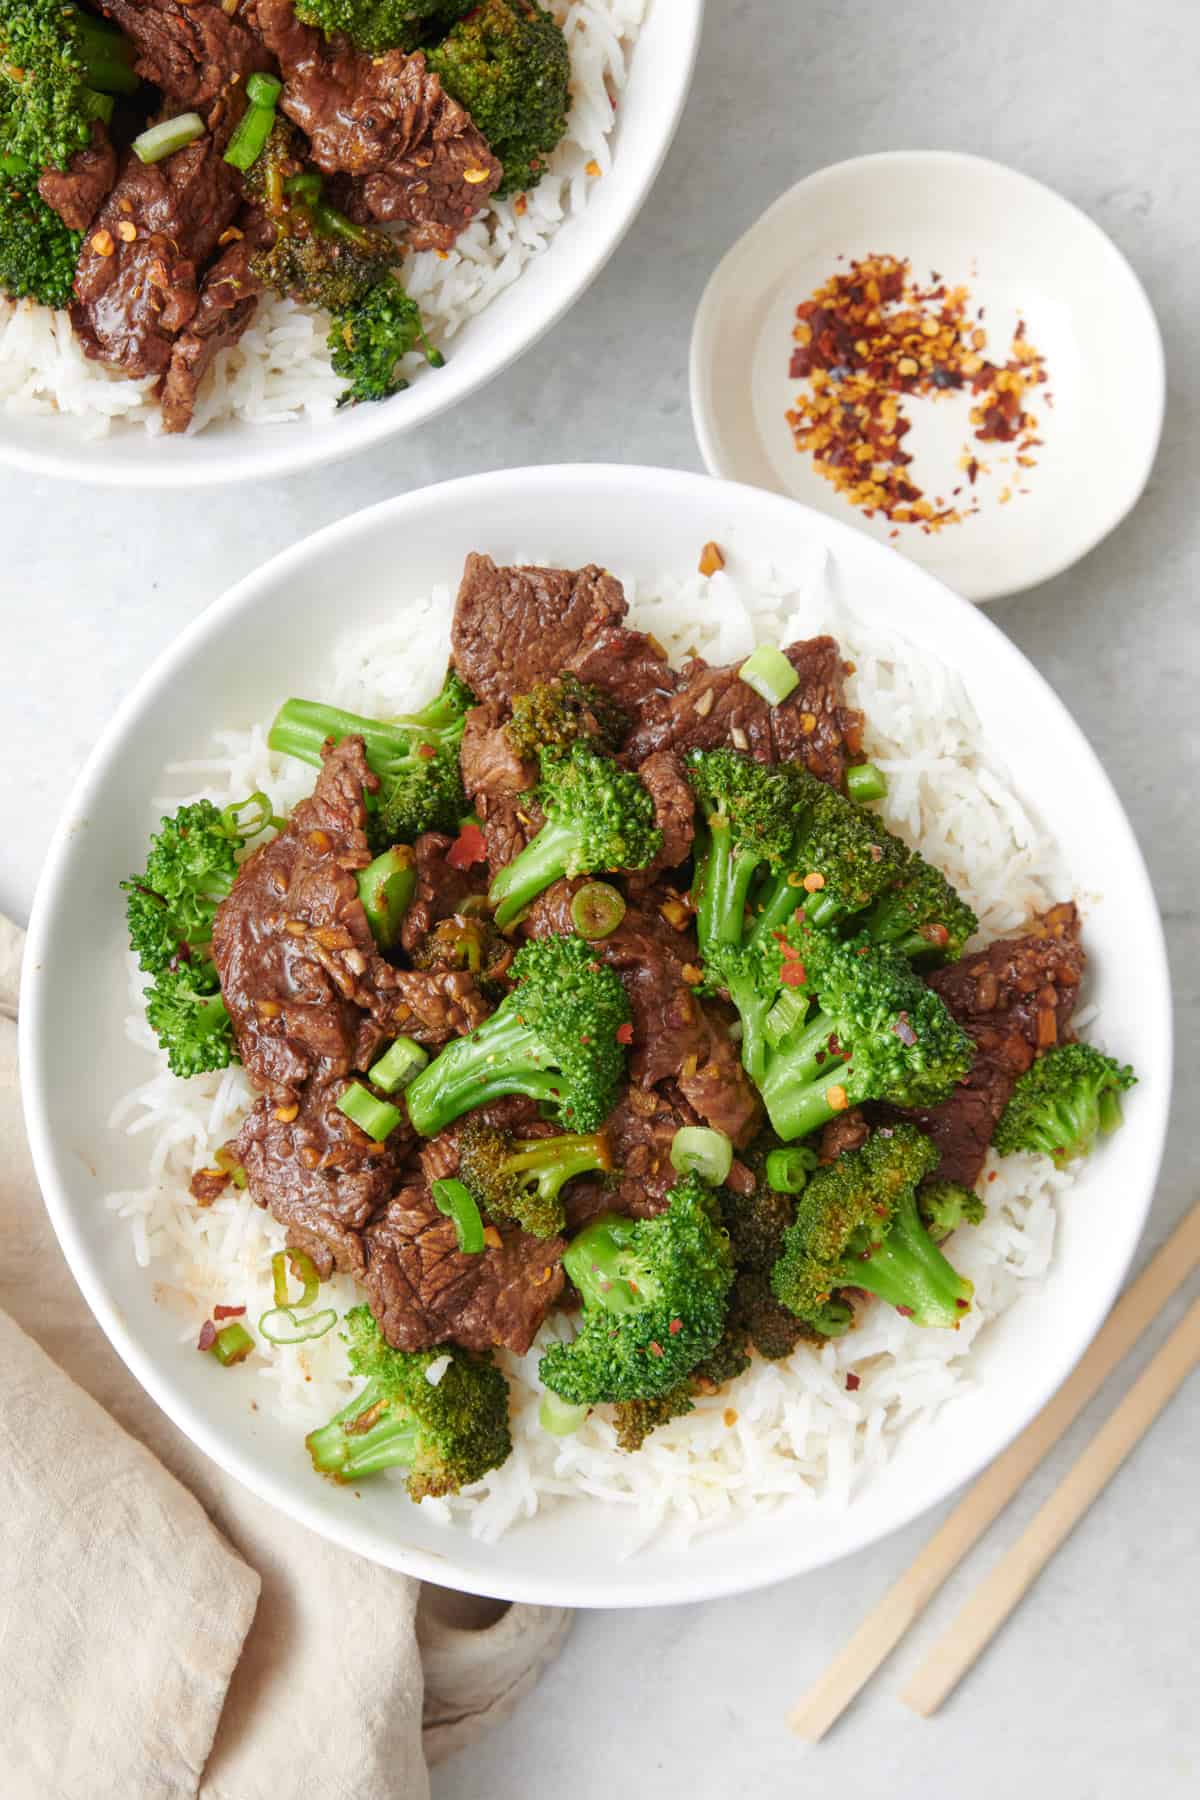 Two large bowls for the beef and broccoli stir fry